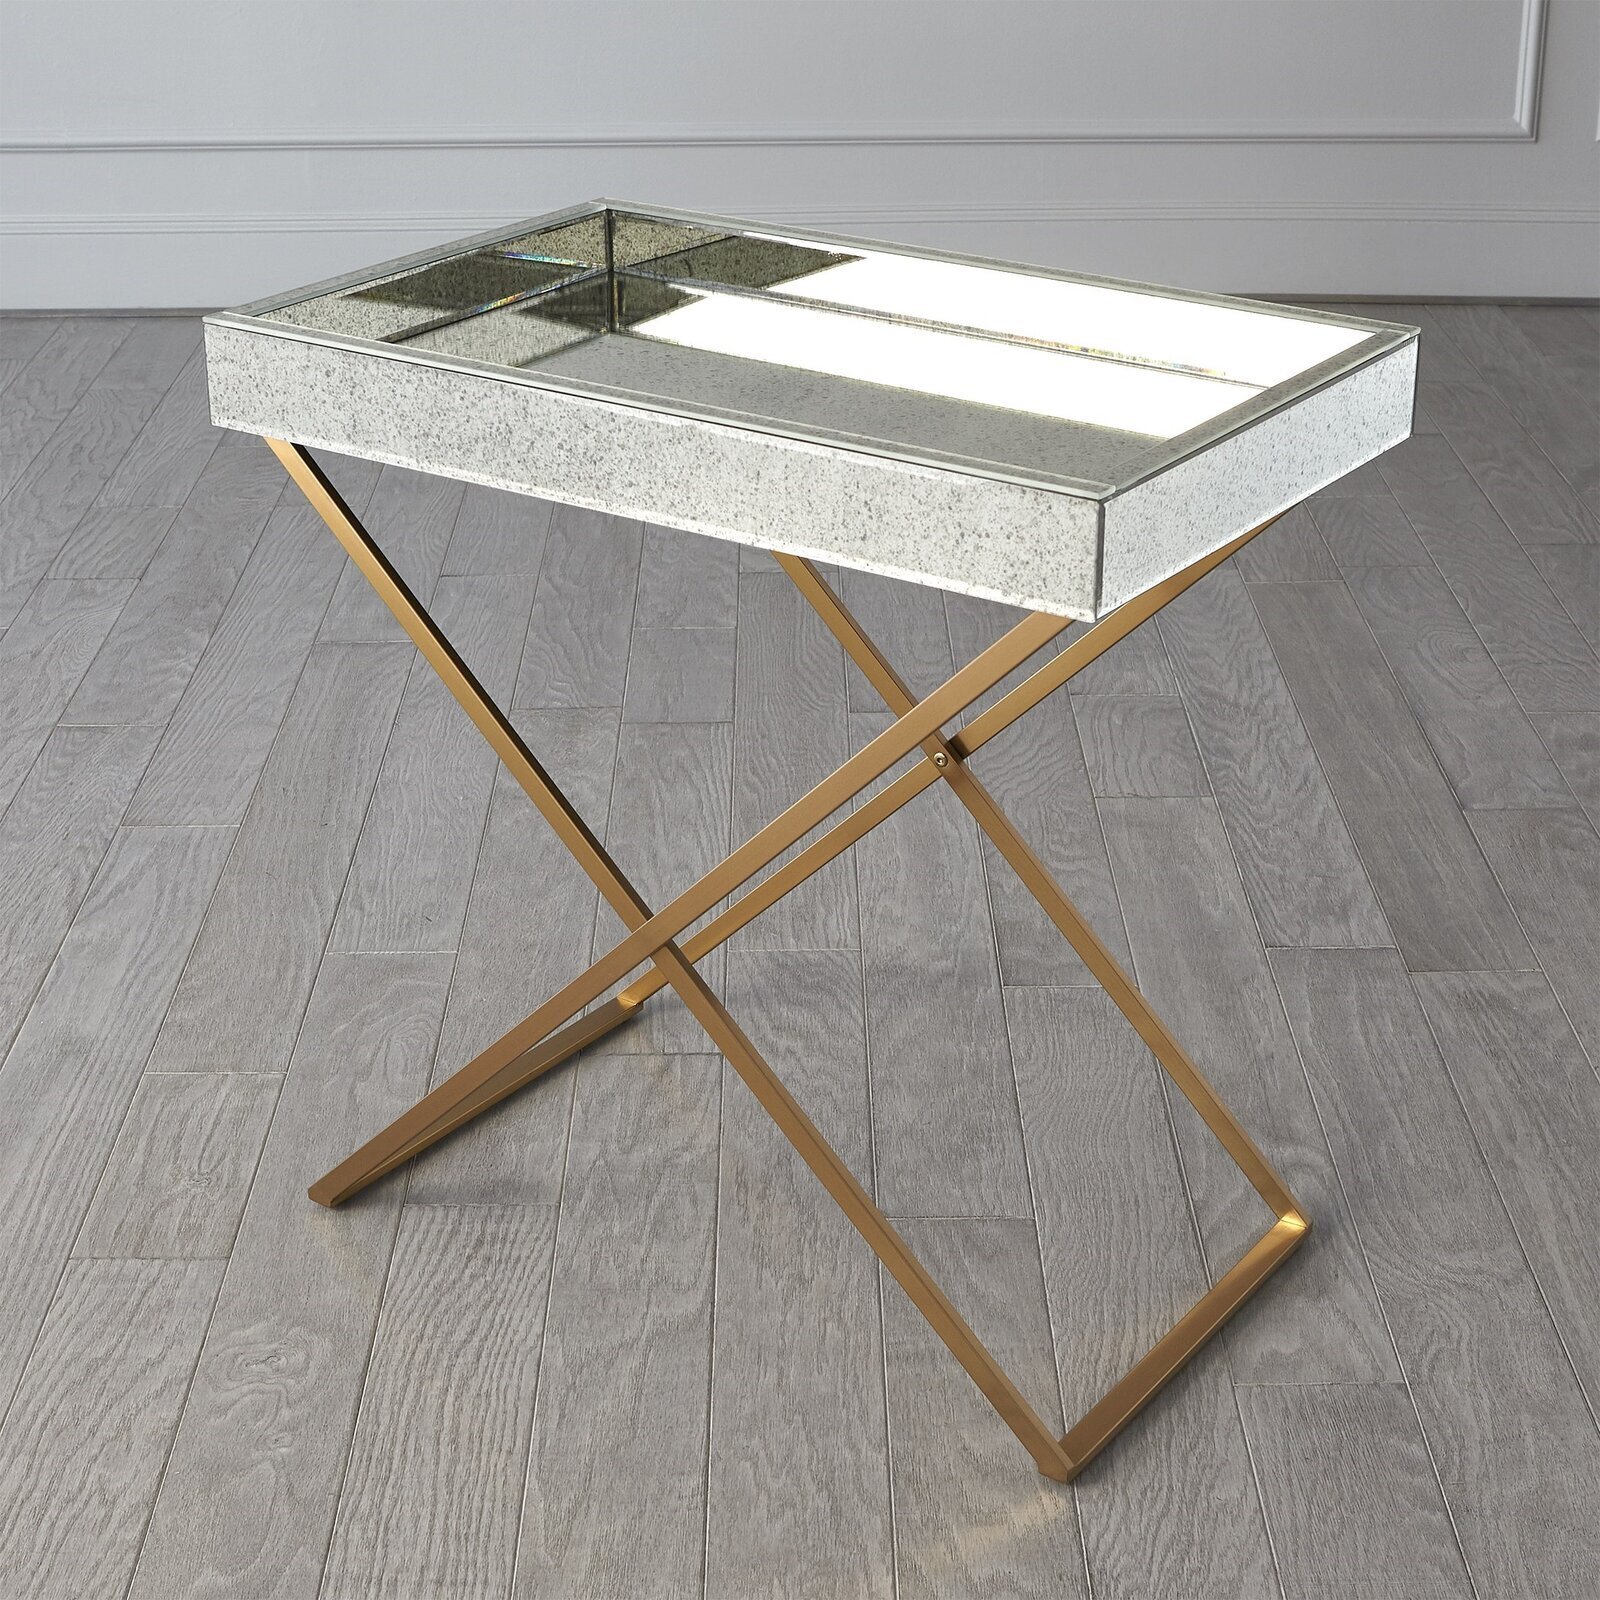 Mirror Topped Metal Folding Table